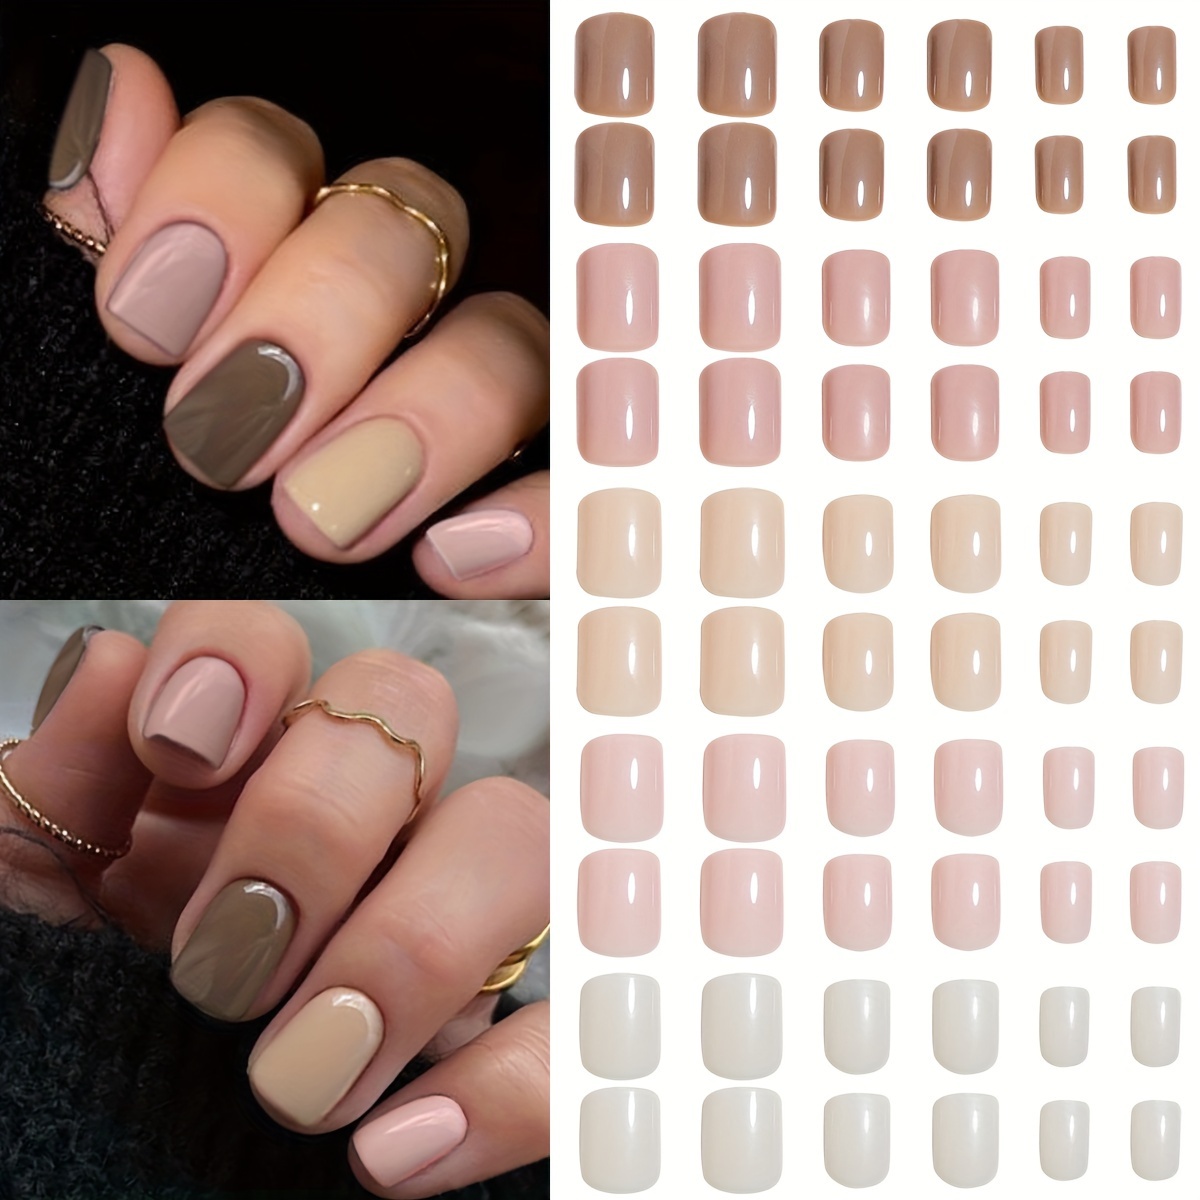 

Brown & Nude Square Shape Short Press On Nails, 1005 Box Set, Glossy Pure Color Finish - Durable And Easy To Apply